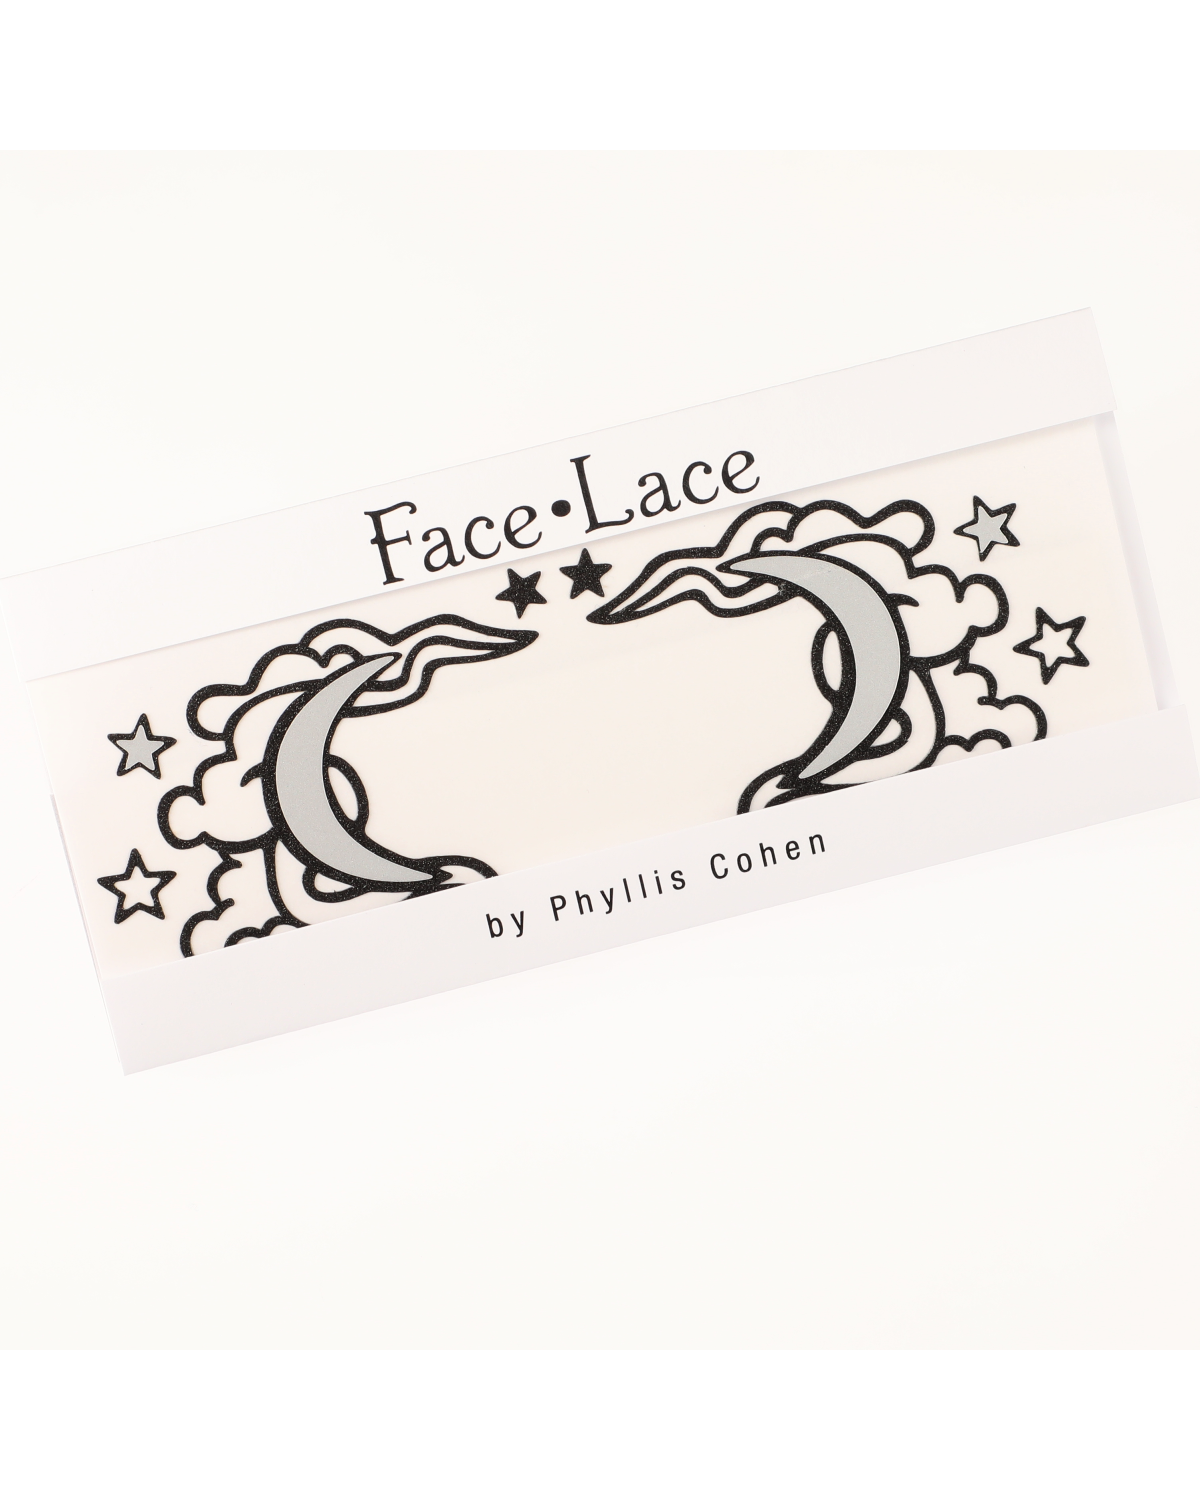 Moon Clouds / Face Lace by Phyllis Cohen